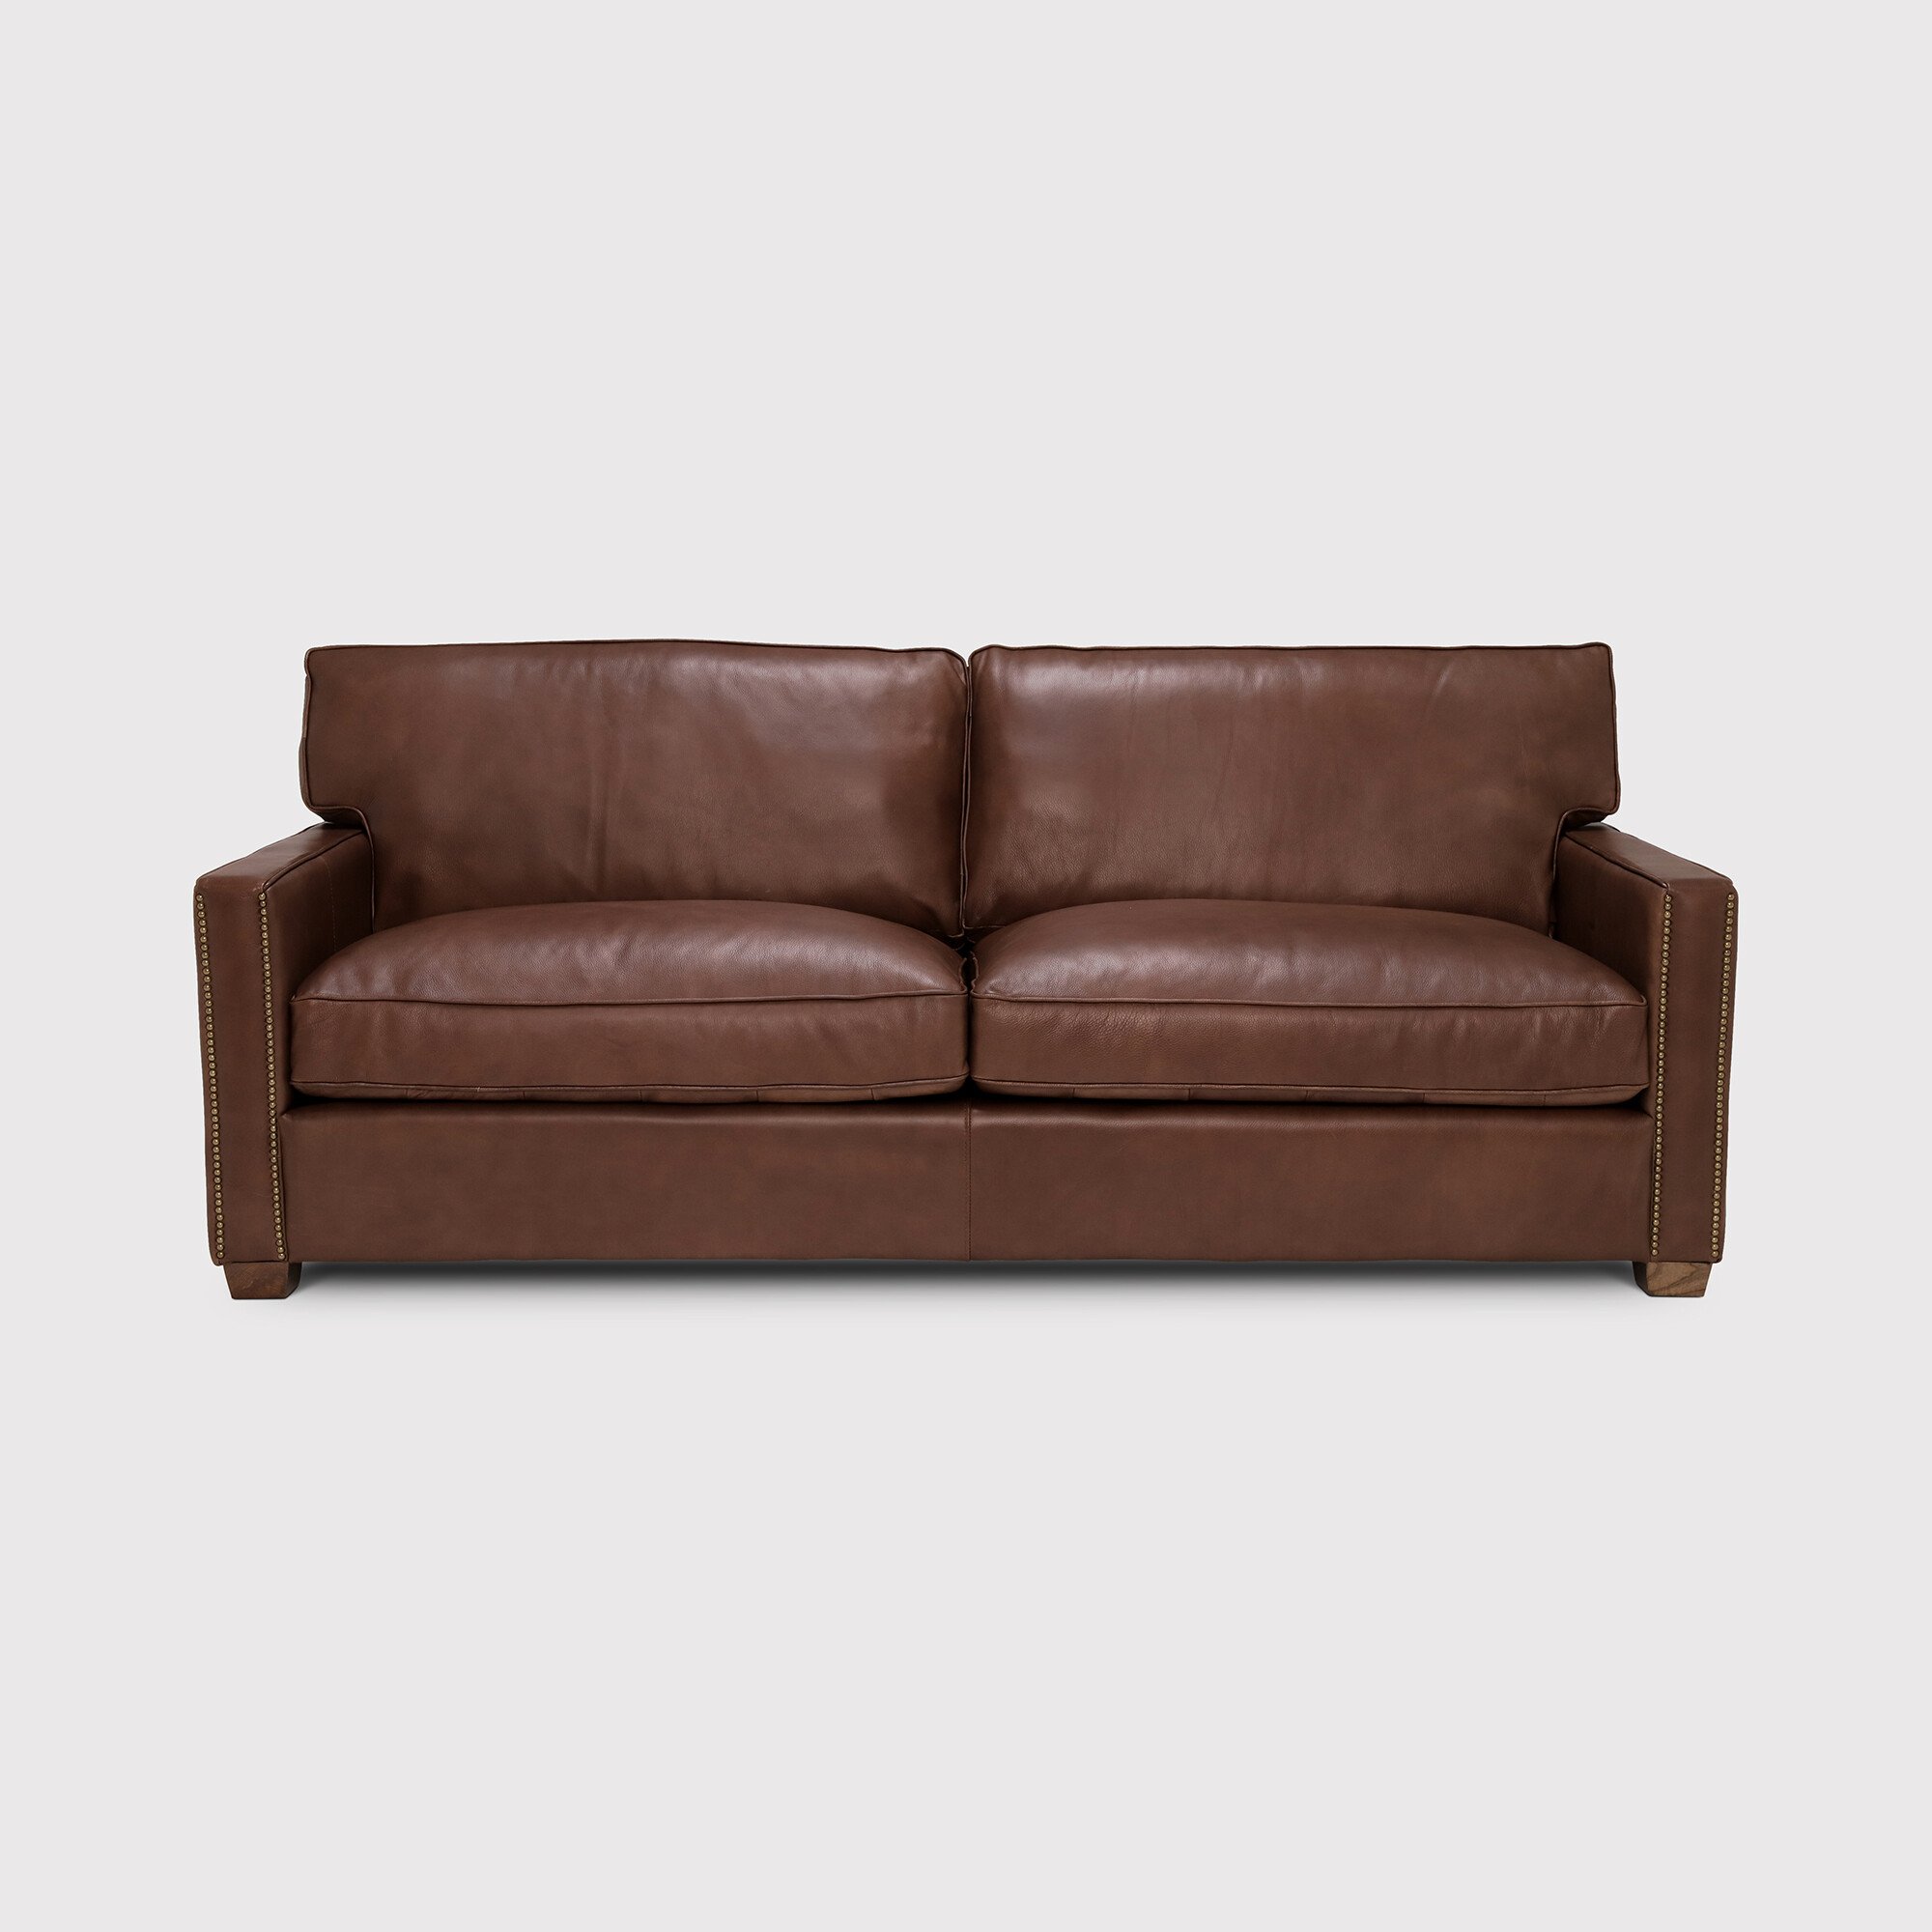 Timothy Oulton Viscount William Sofa 3 Seater, Brown Leather | Barker & Stonehouse